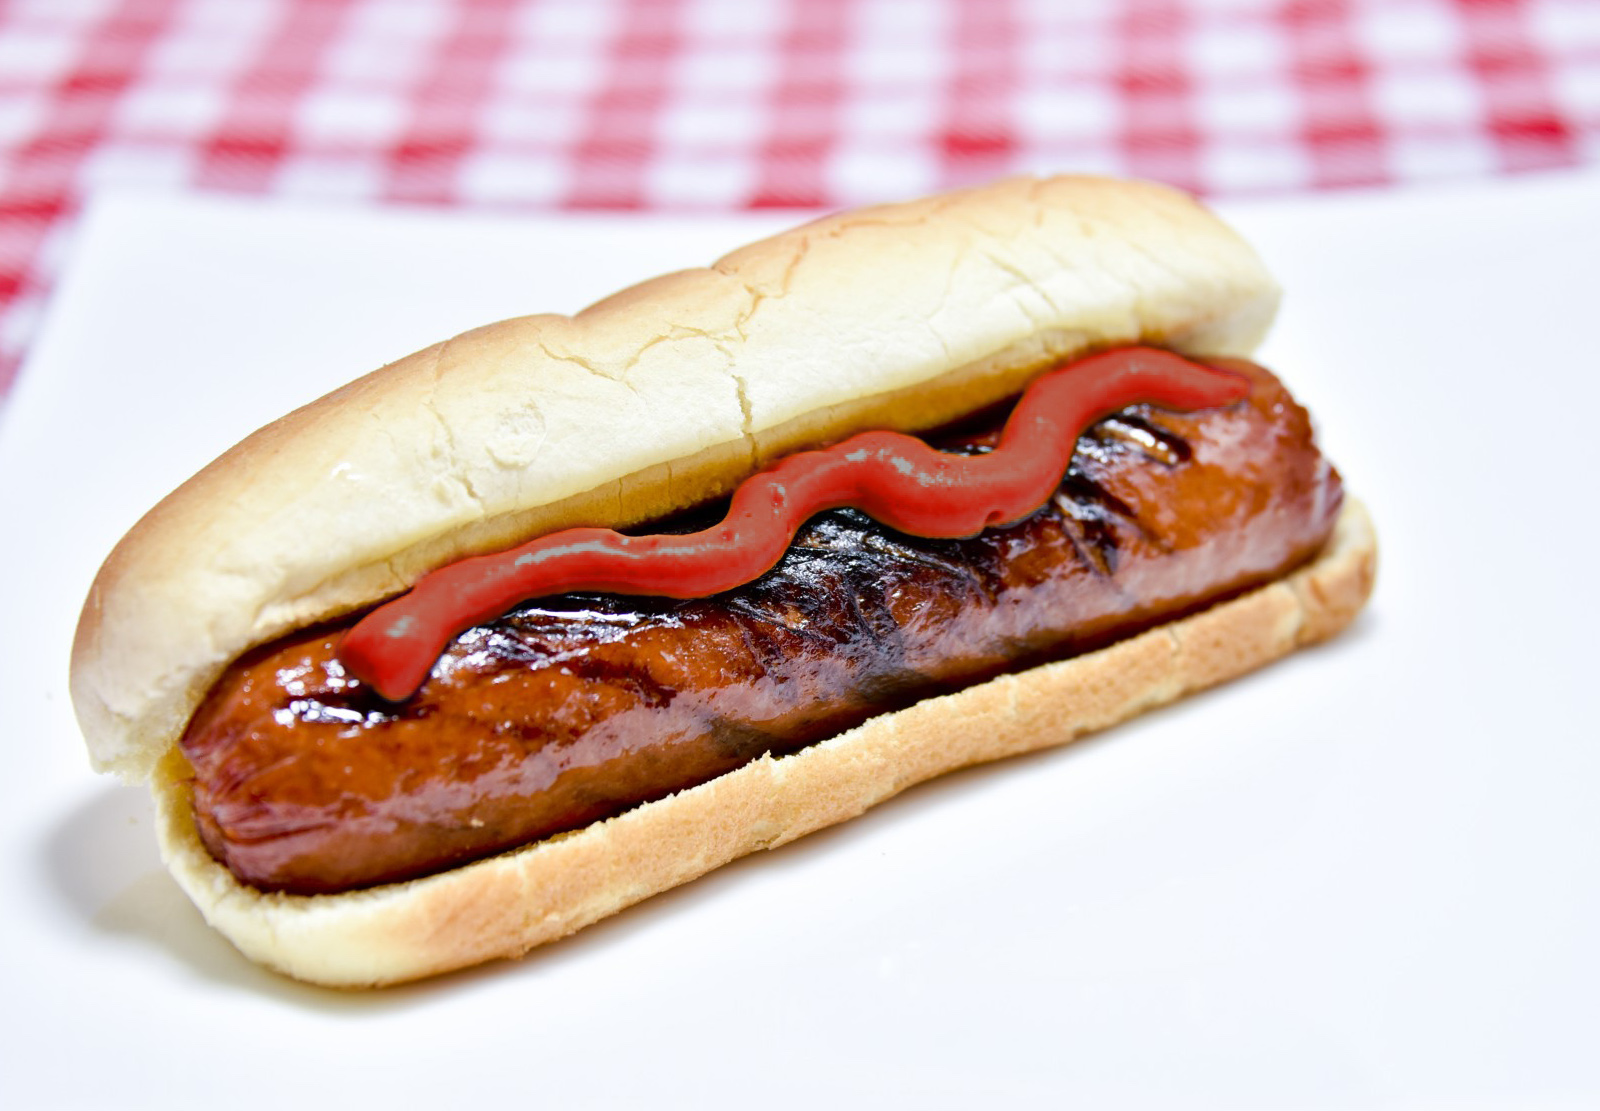 Build Saucy Hot Dog & I'll Give You Celebrity Beefcake … Quiz 38